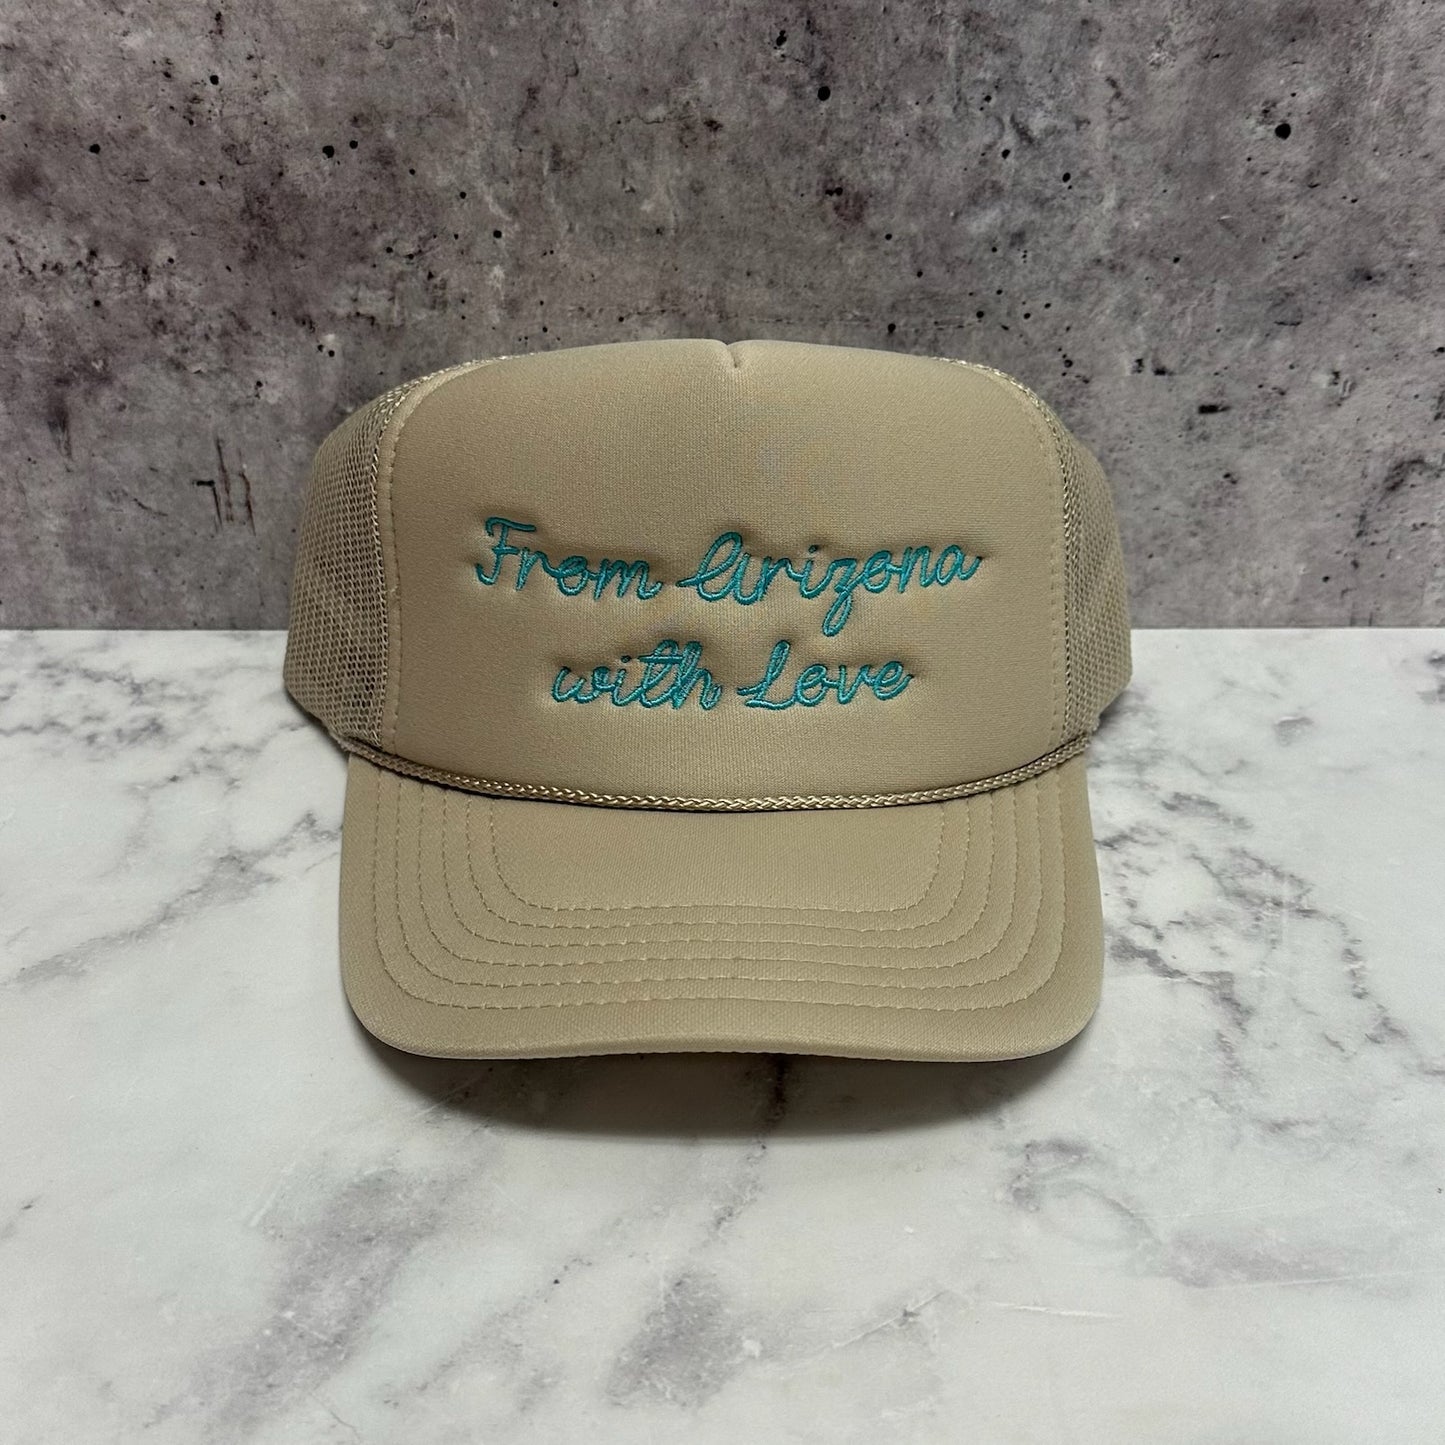 From Arizona with Love Trucker Hat